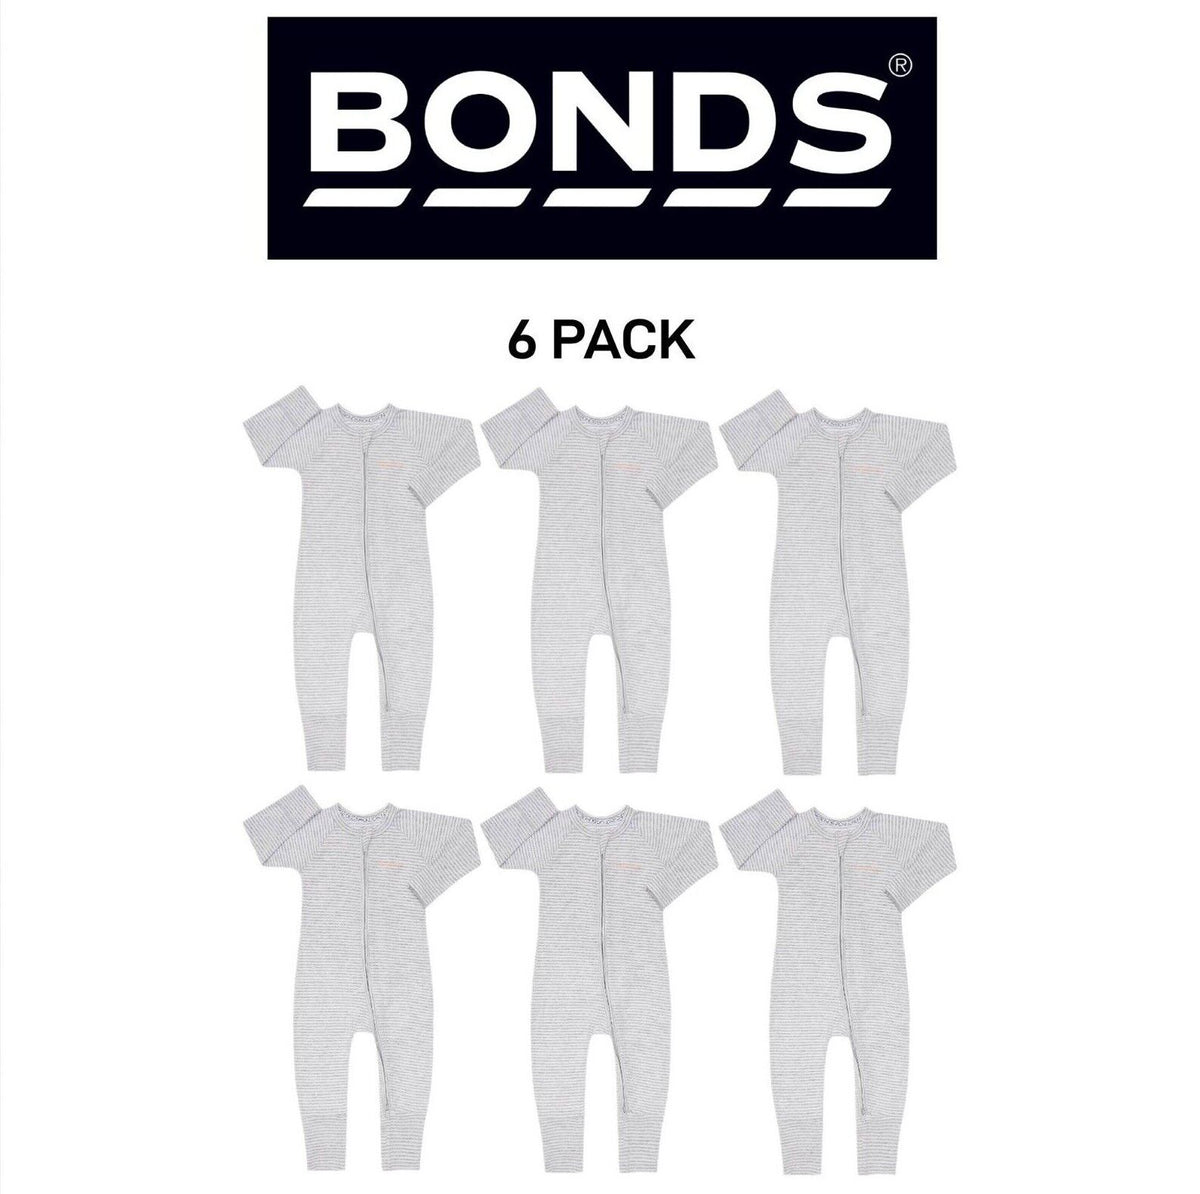 Bonds Baby Wondersuit Two-way Zip Soft Cosy & Stretchable Fabric 6 Pack BZDYM